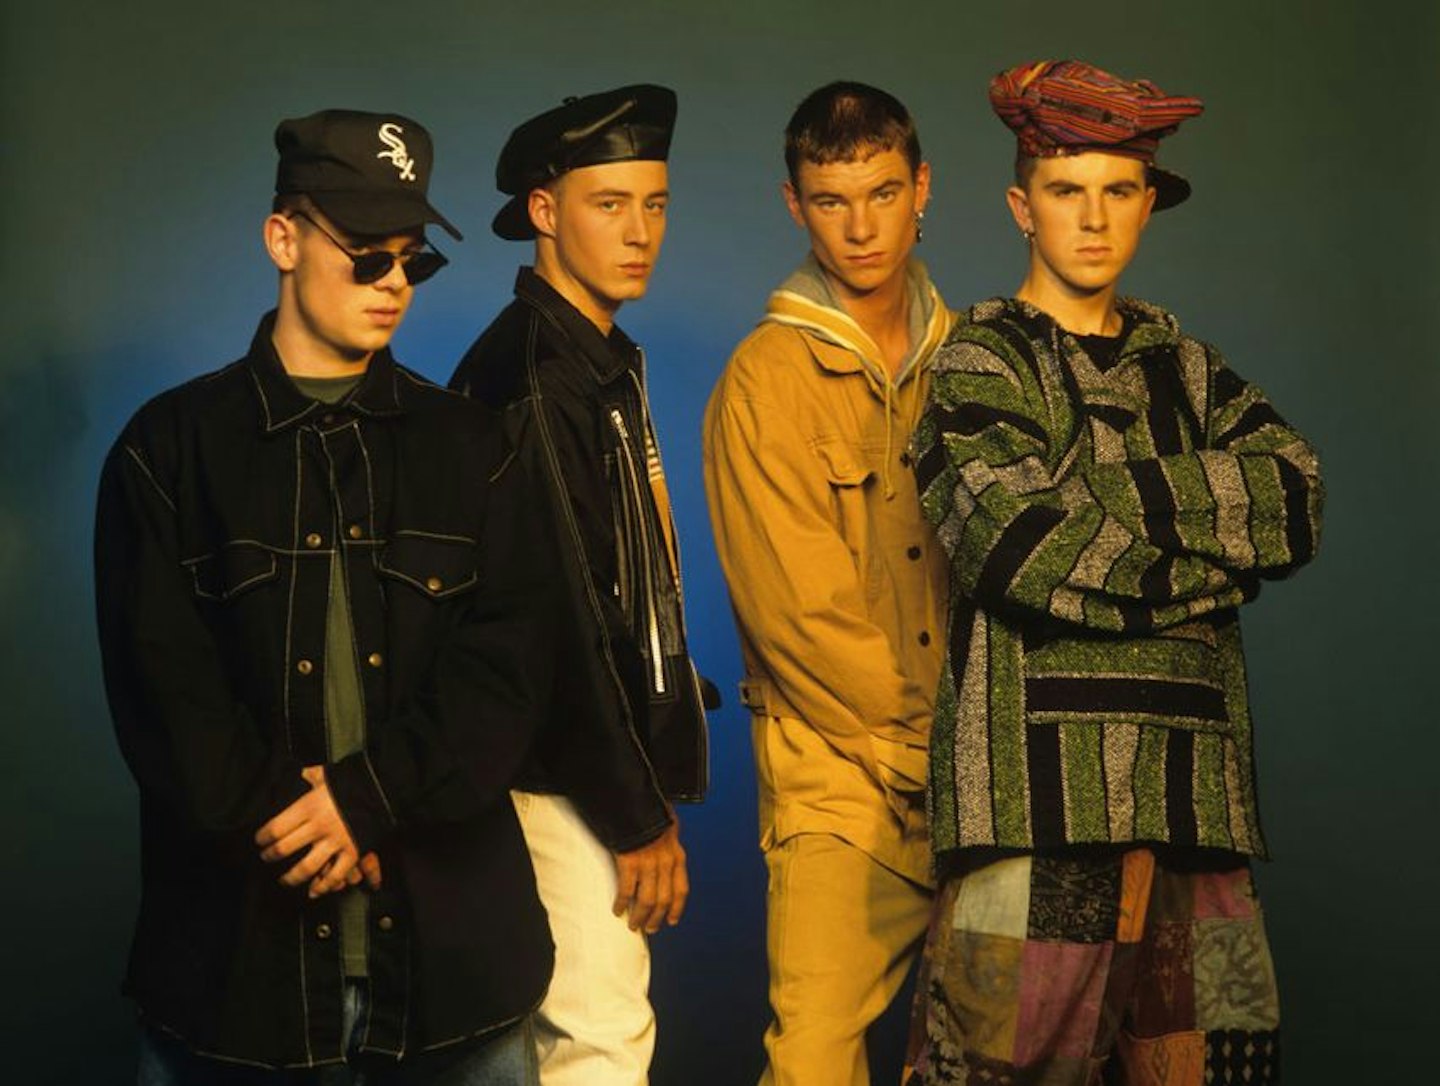 East 17 now